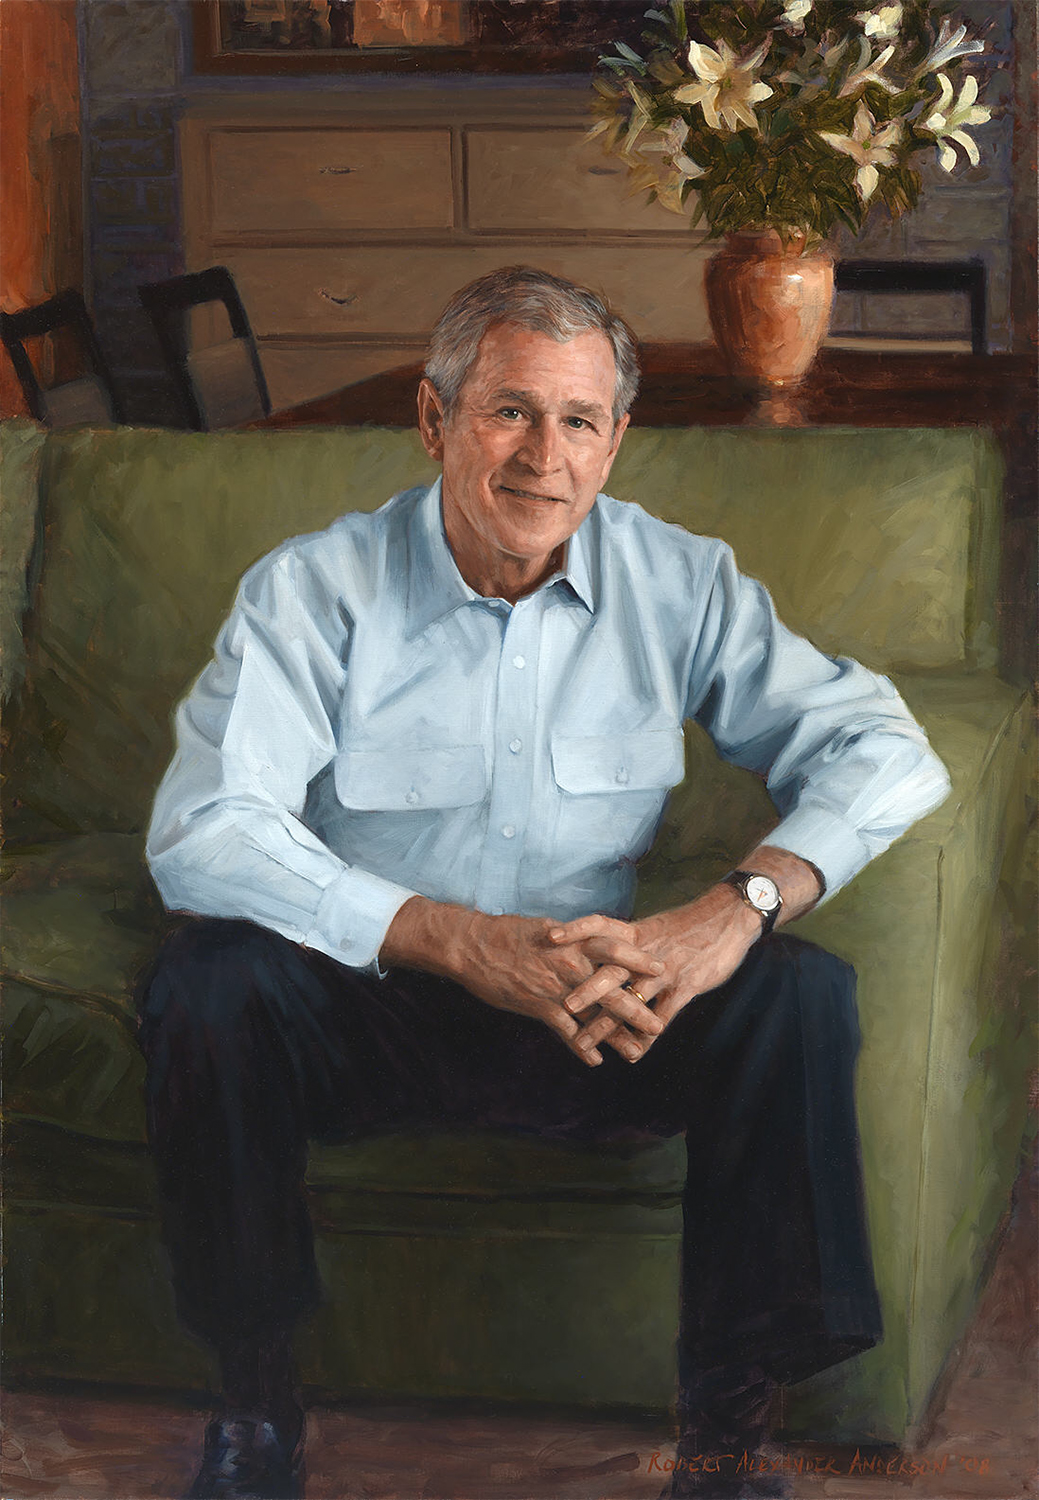 casual portrait of a man in a blue shirt sitting in a green chair